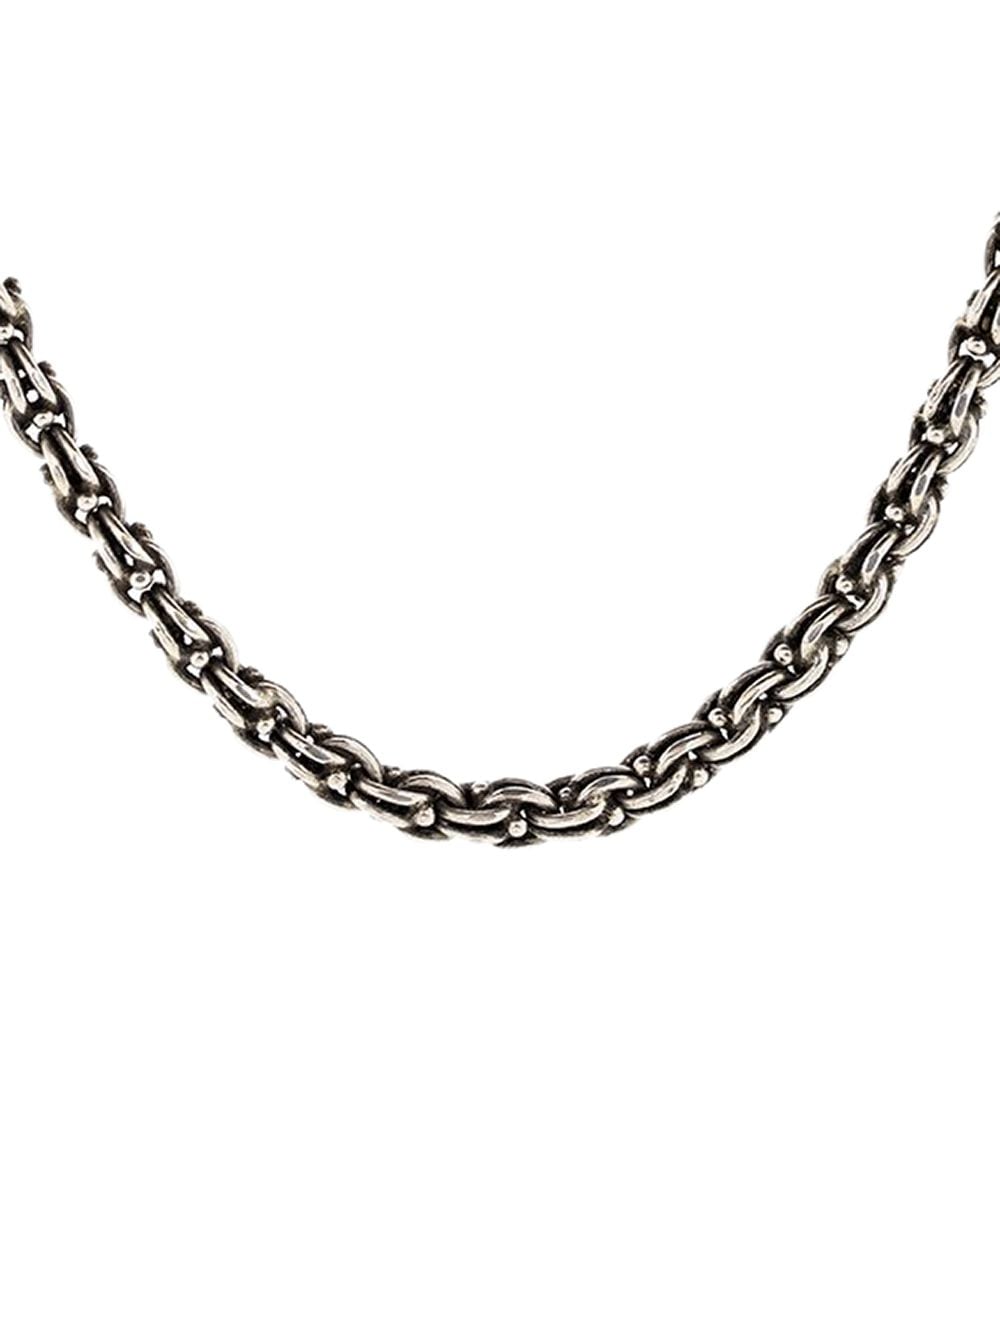 john varvatos cable link chain necklace - silver